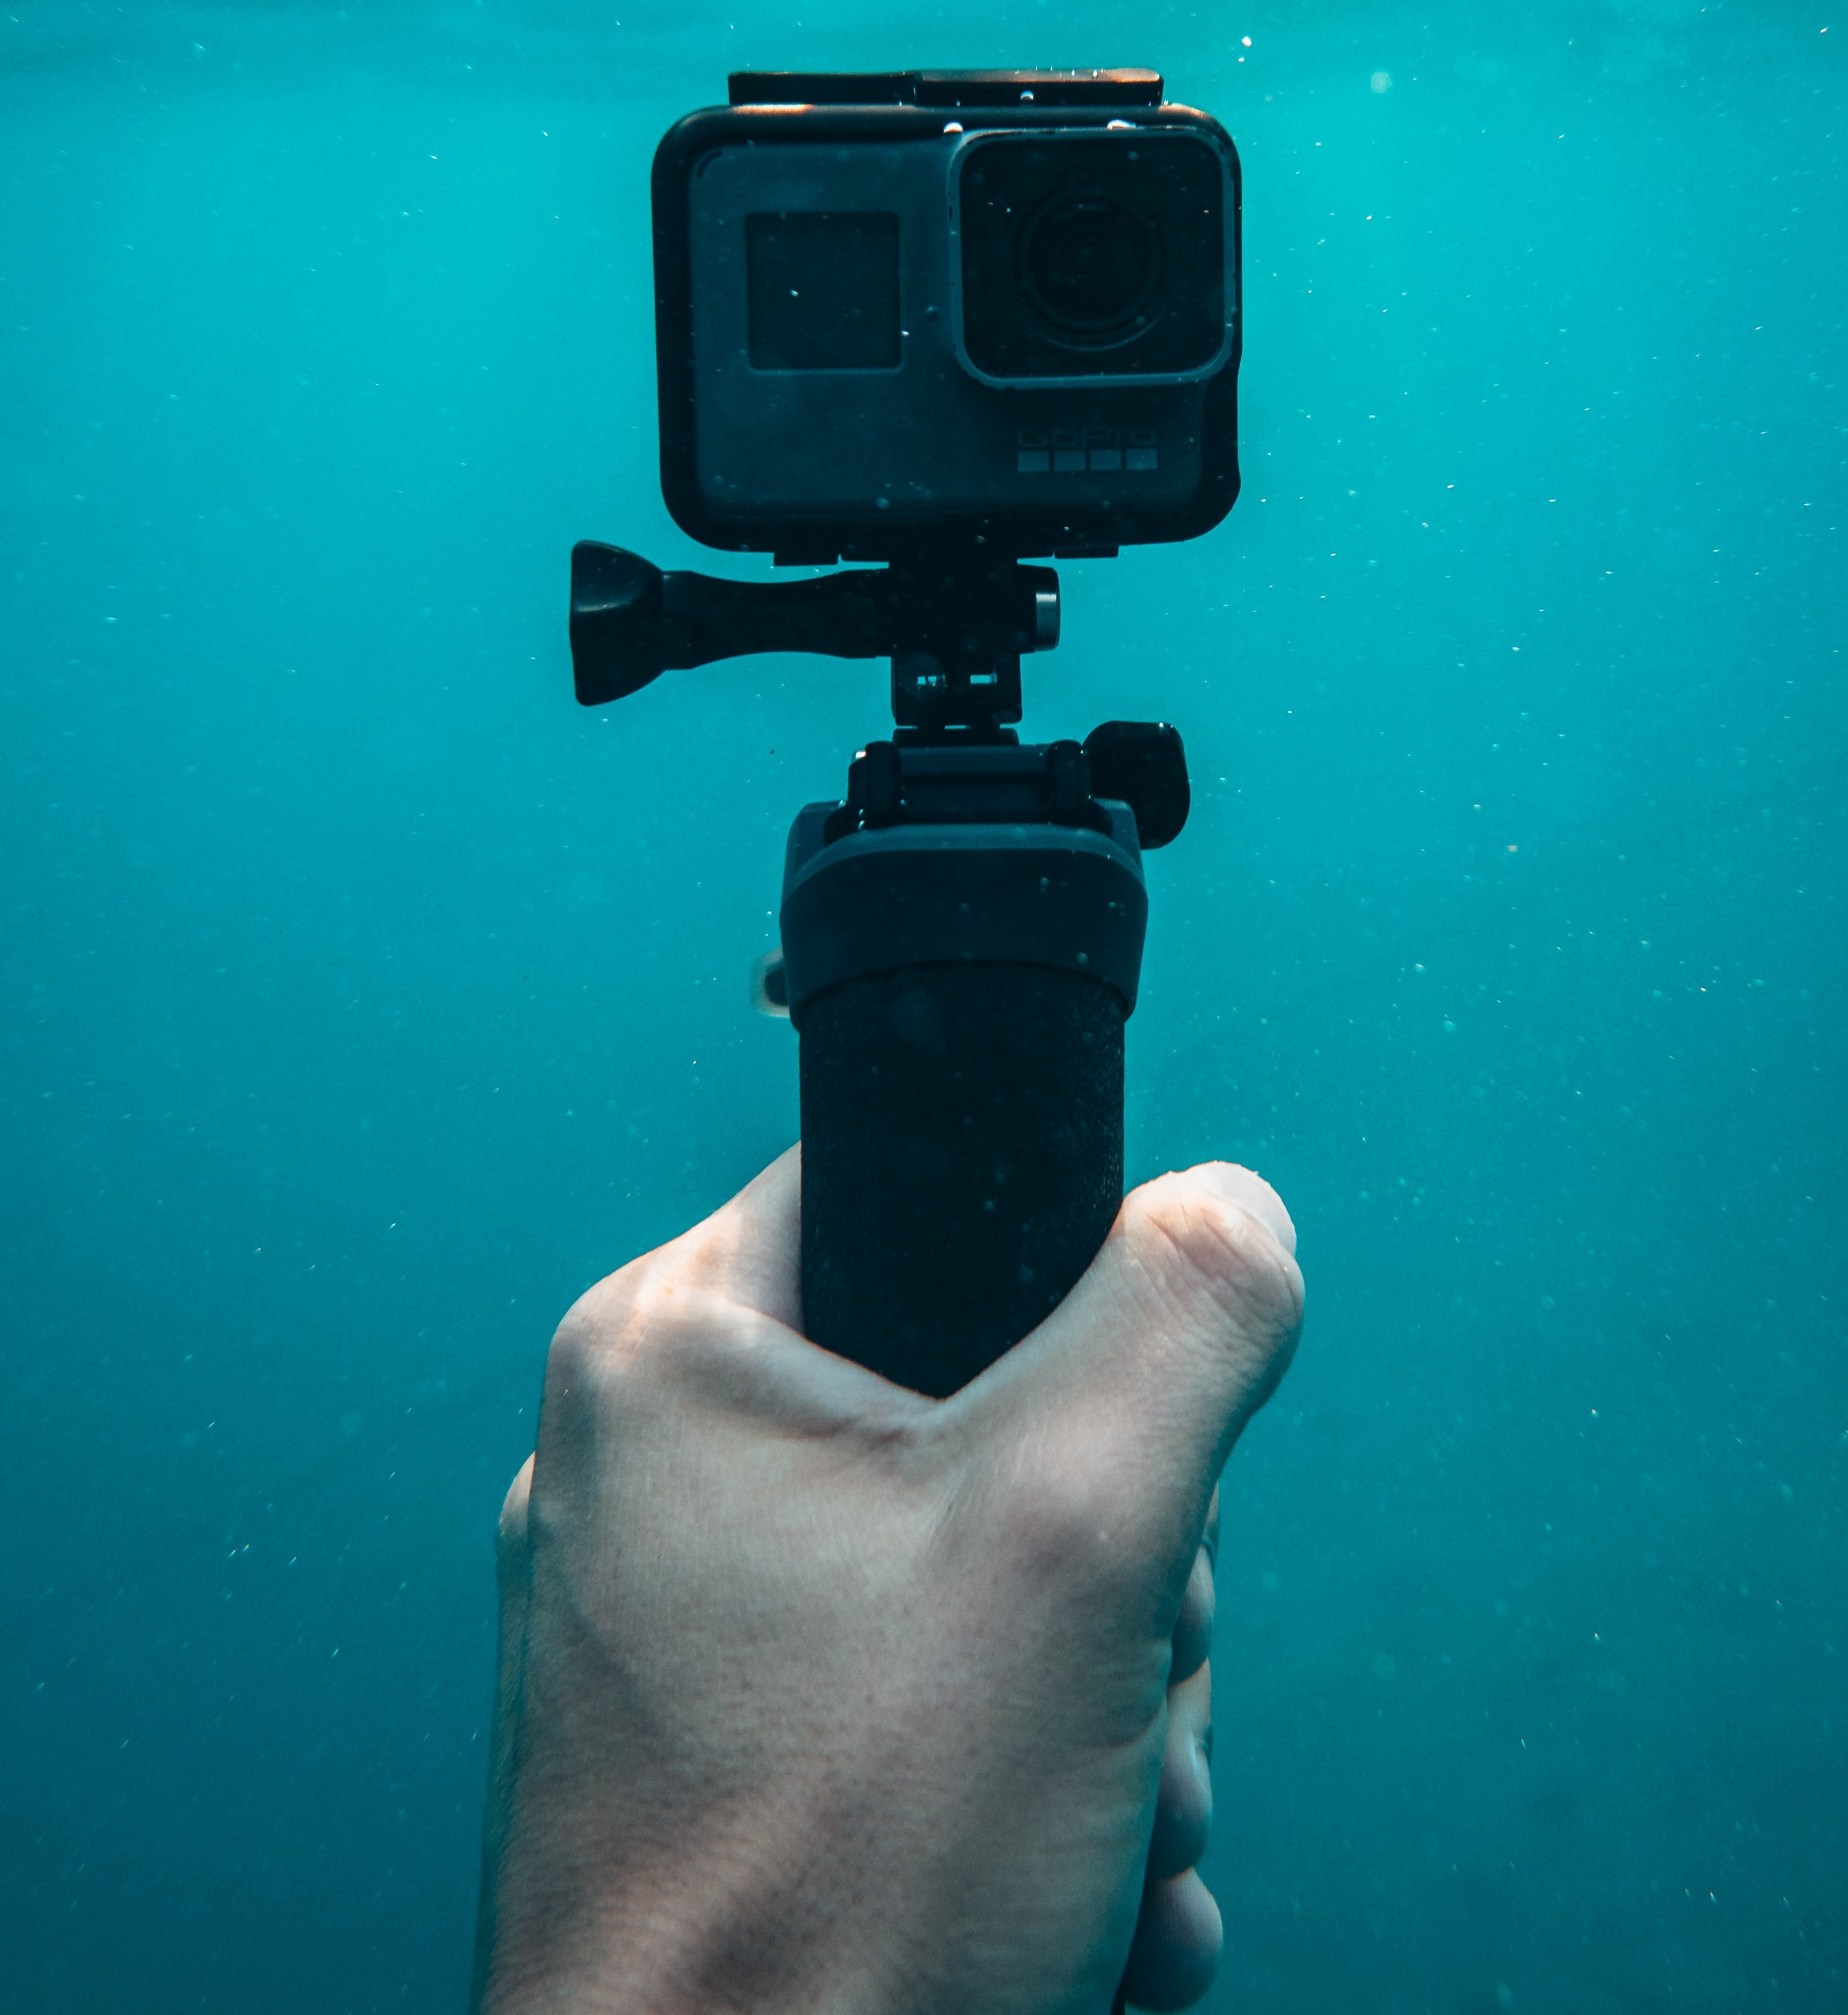 How GoPro dominated its industry with user generated content